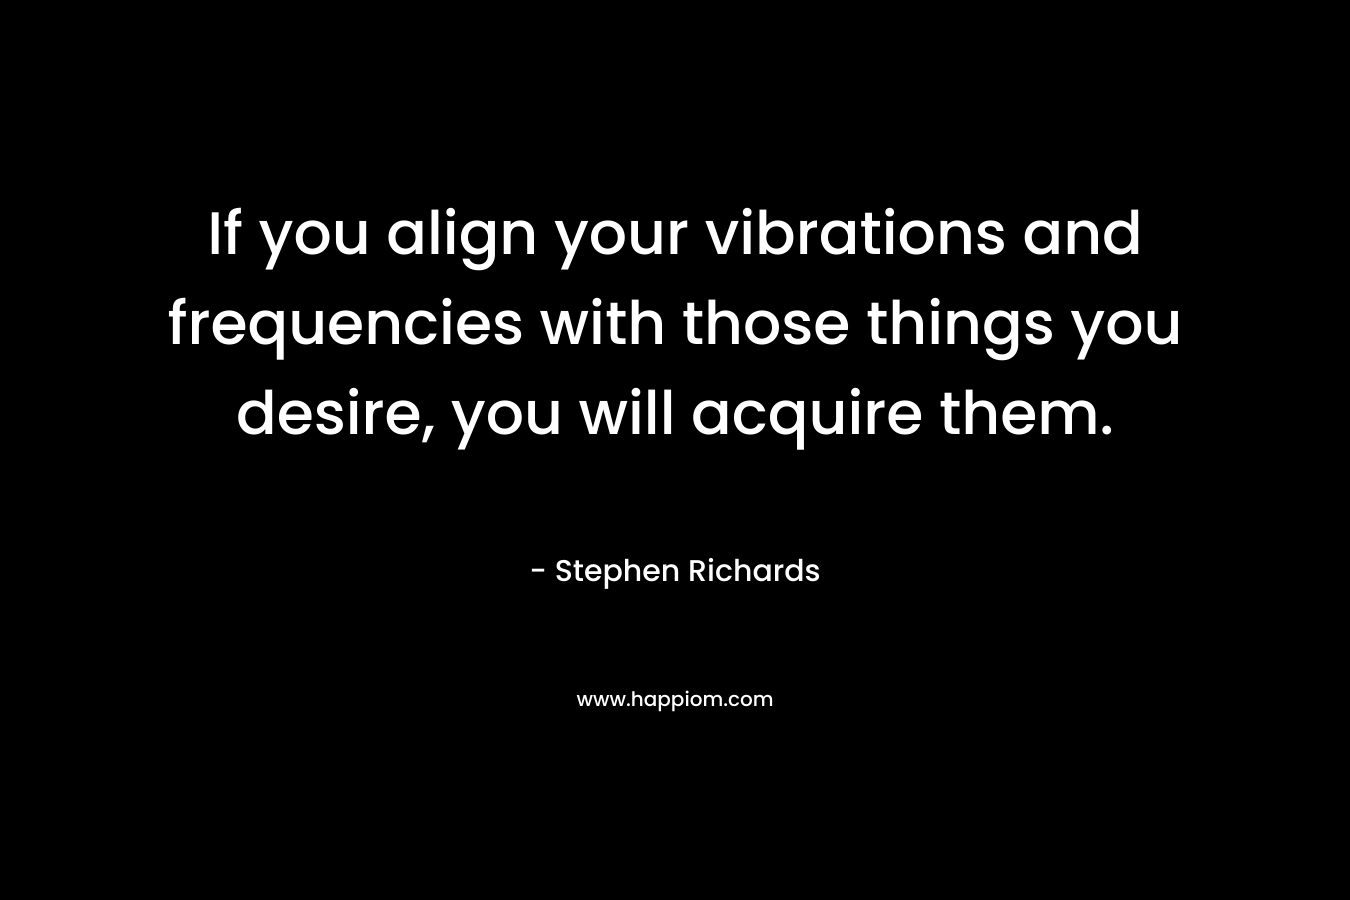 If you align your vibrations and frequencies with those things you desire, you will acquire them. – Stephen Richards